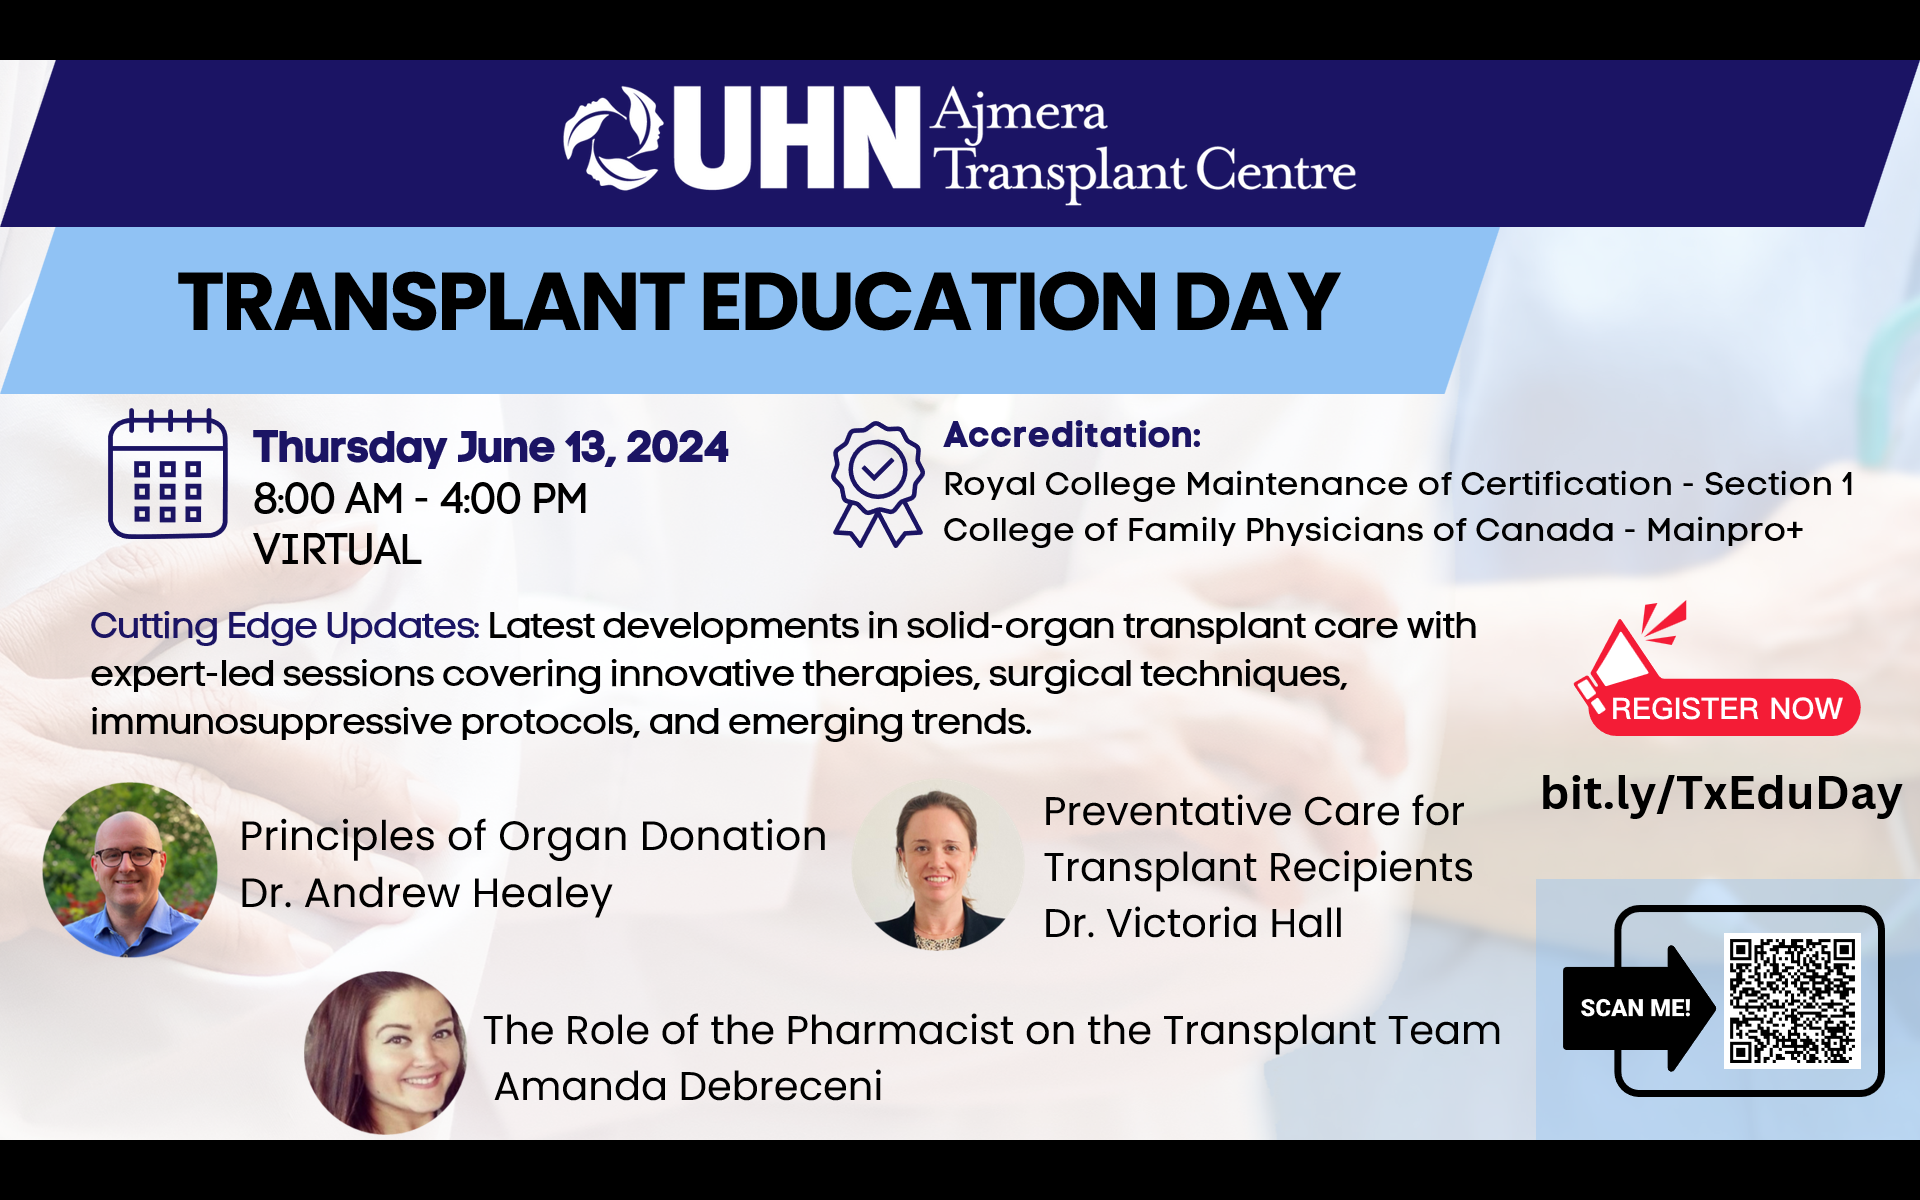 Poster for the Transplant Education Day 